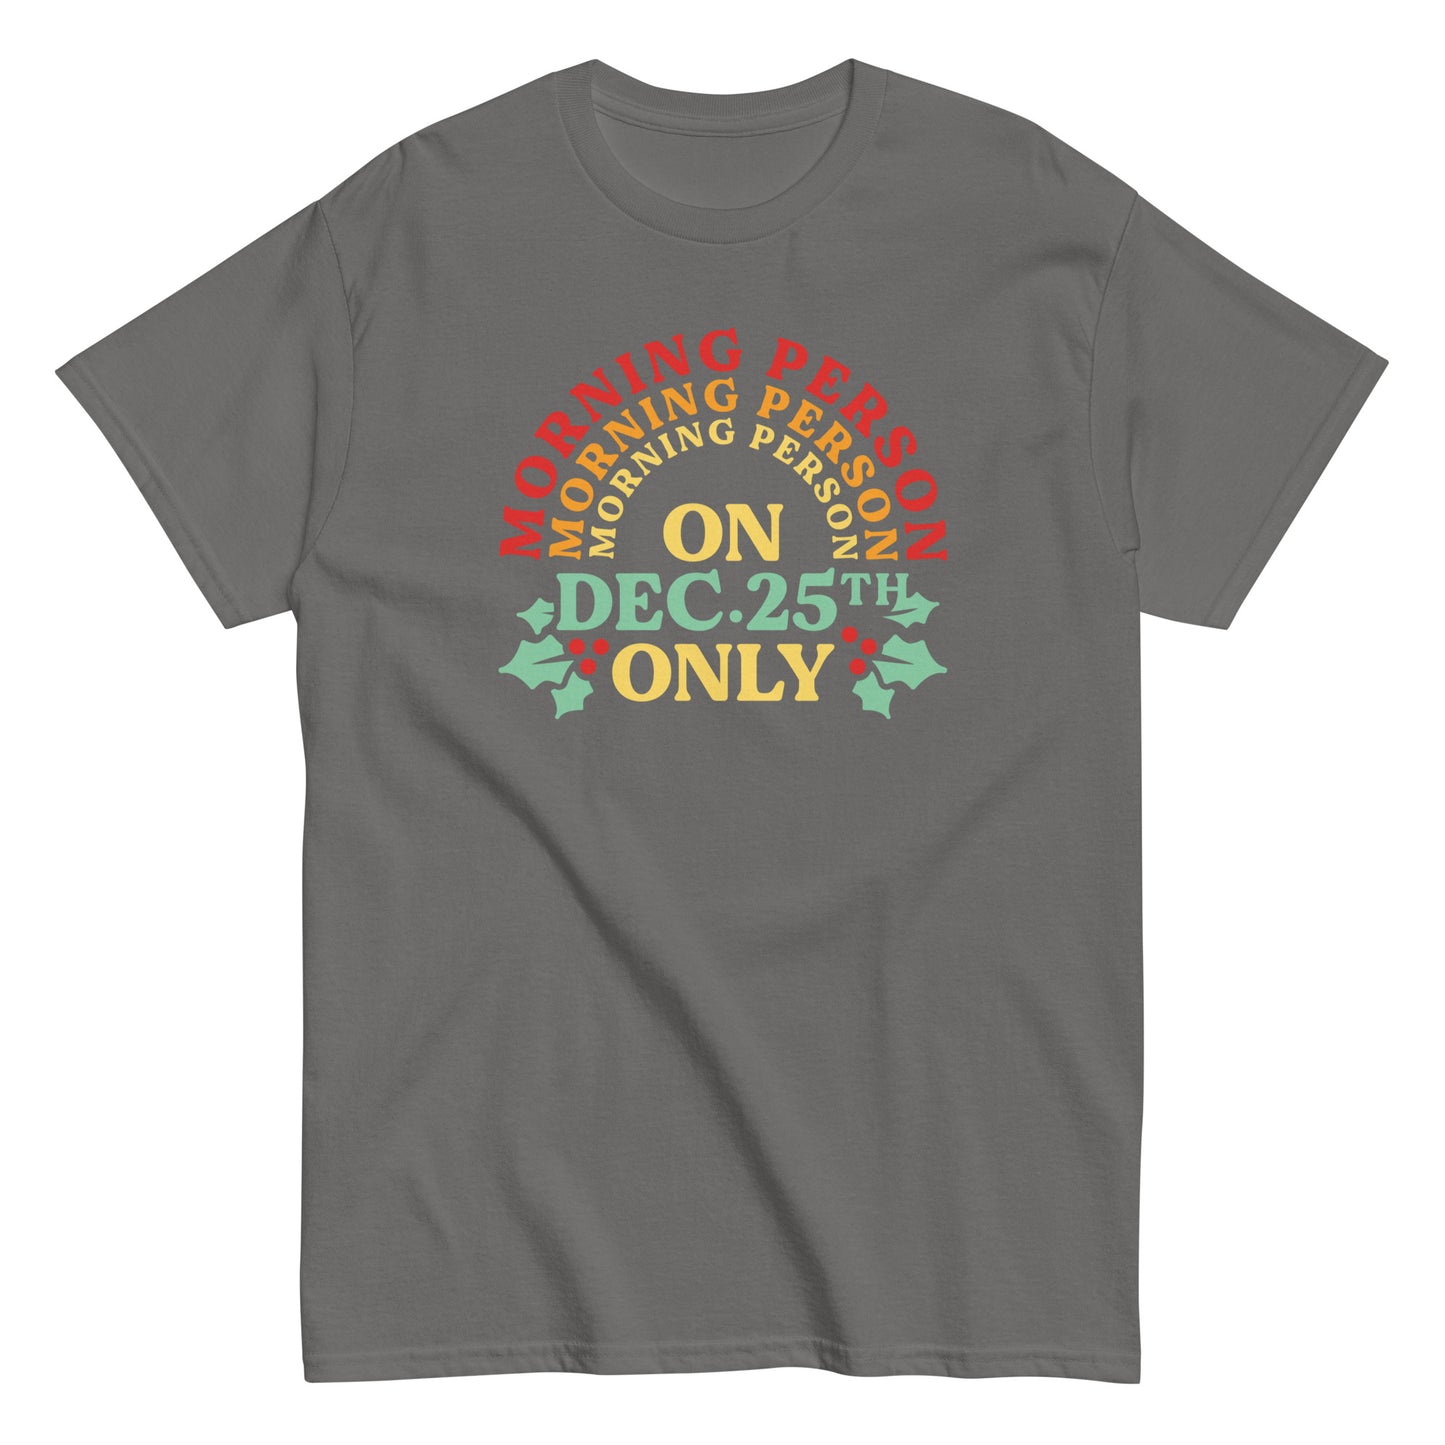 Morning Person On Dec 25th Only Men's Classic Tee